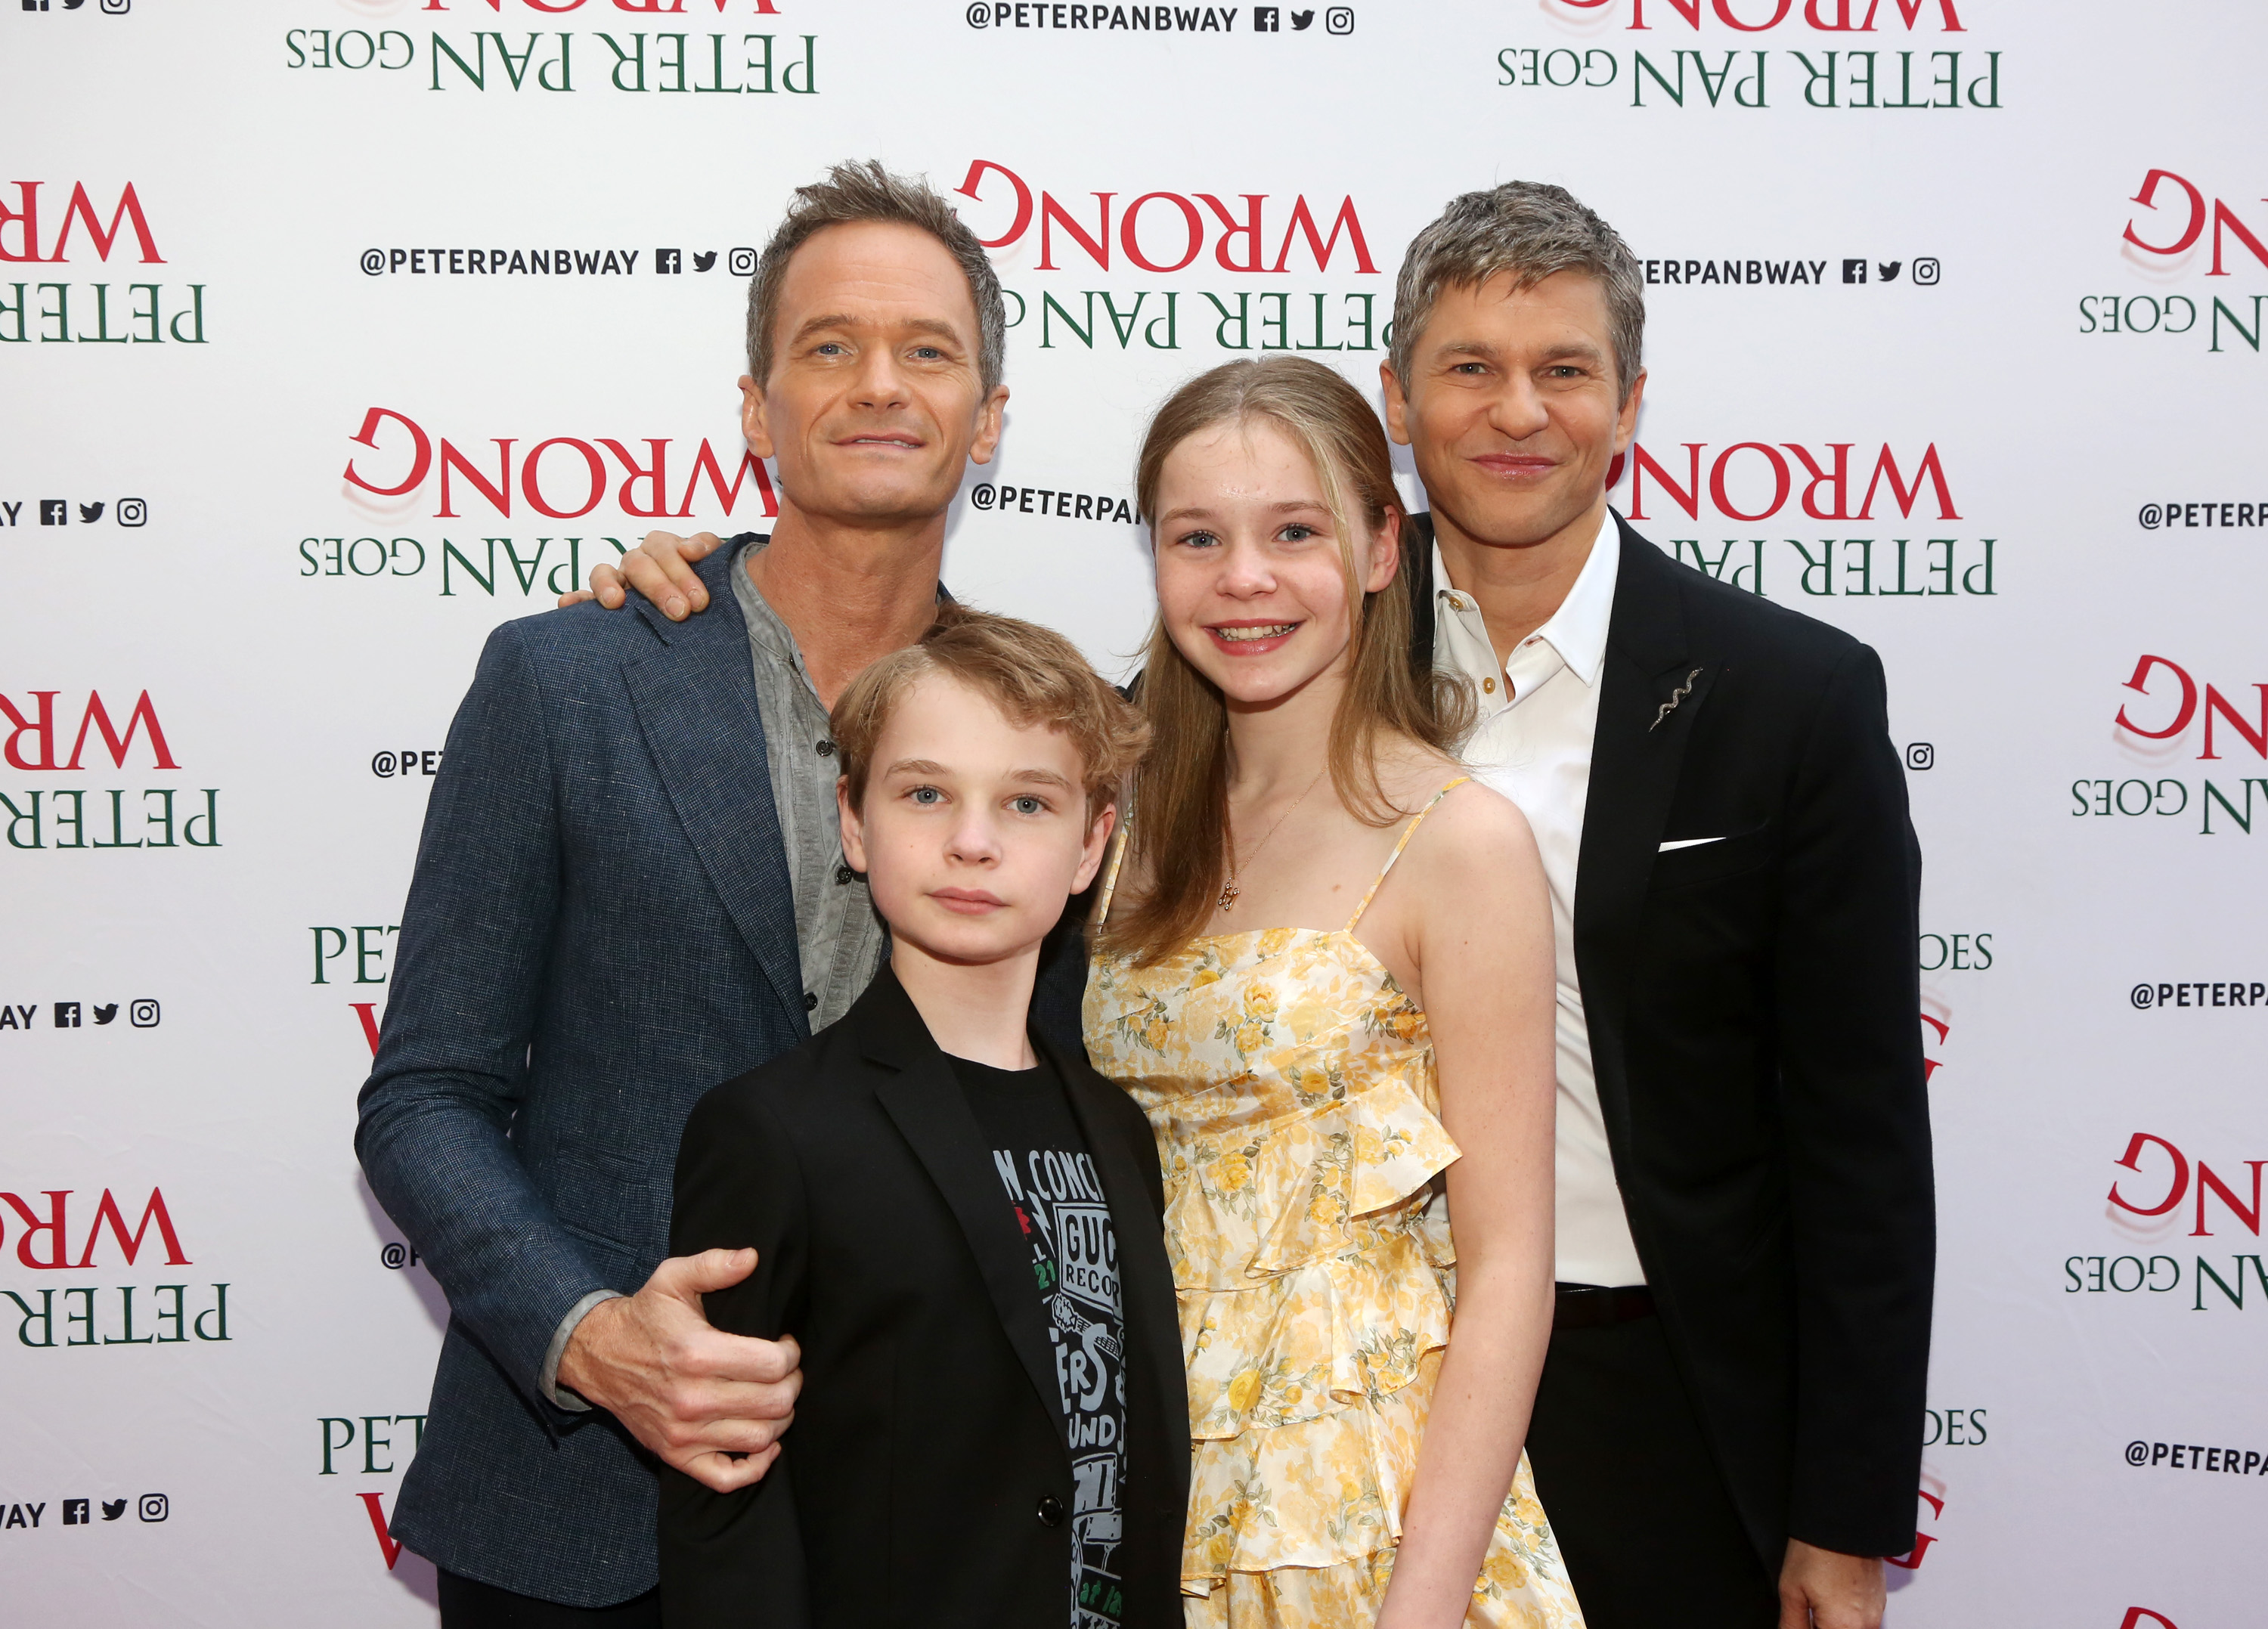 Neil Patrick Harris, Gideon Burtka-Harris, Harper Burtka-Harris and David Burtka at the opening night of "Peter Pan Goes Wrong" on Broadway at The Ethel Barrymore Theatre on April 19, 2023 in New York City. | Source: Getty Images